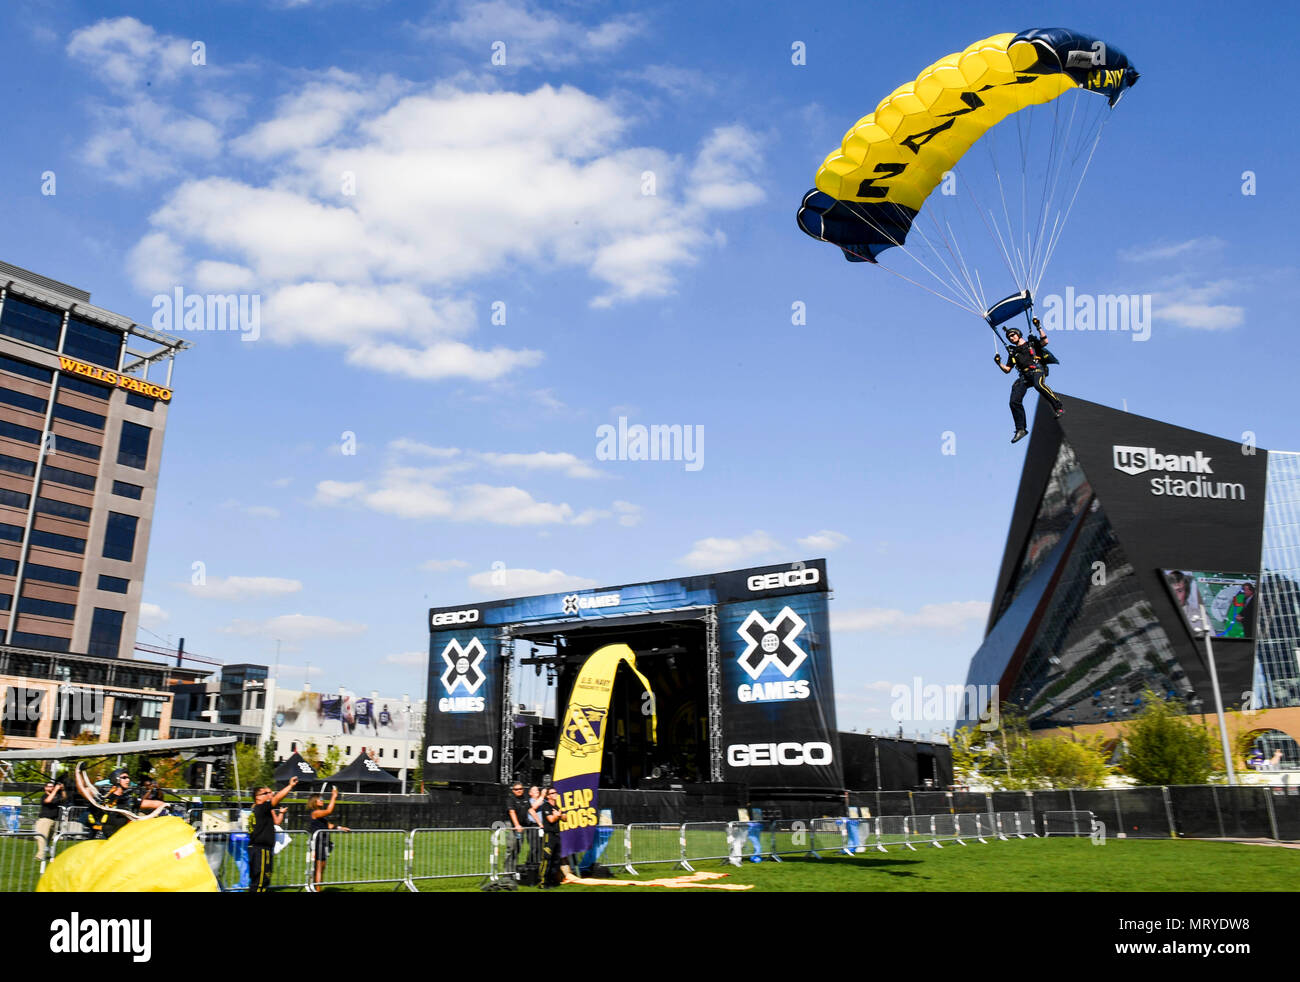 170714-N-RM689-123  MINNEAPOLIS, Minnesota (July 14, 2017) A member of U.S. Navy Parachute Team “The Leap Frogs” prepares to land in Elliot Park during a skydiving demonstration at the Summer X Games. The Leap Frogs are based in San Diego and perform aerial parachute demonstrations around the nation in support of Naval Special Warfare and Navy recruiting. (U.S. Navy photo by Mass Communication Specialist 3rd Class Kelsey L. Adams/Released) Stock Photo